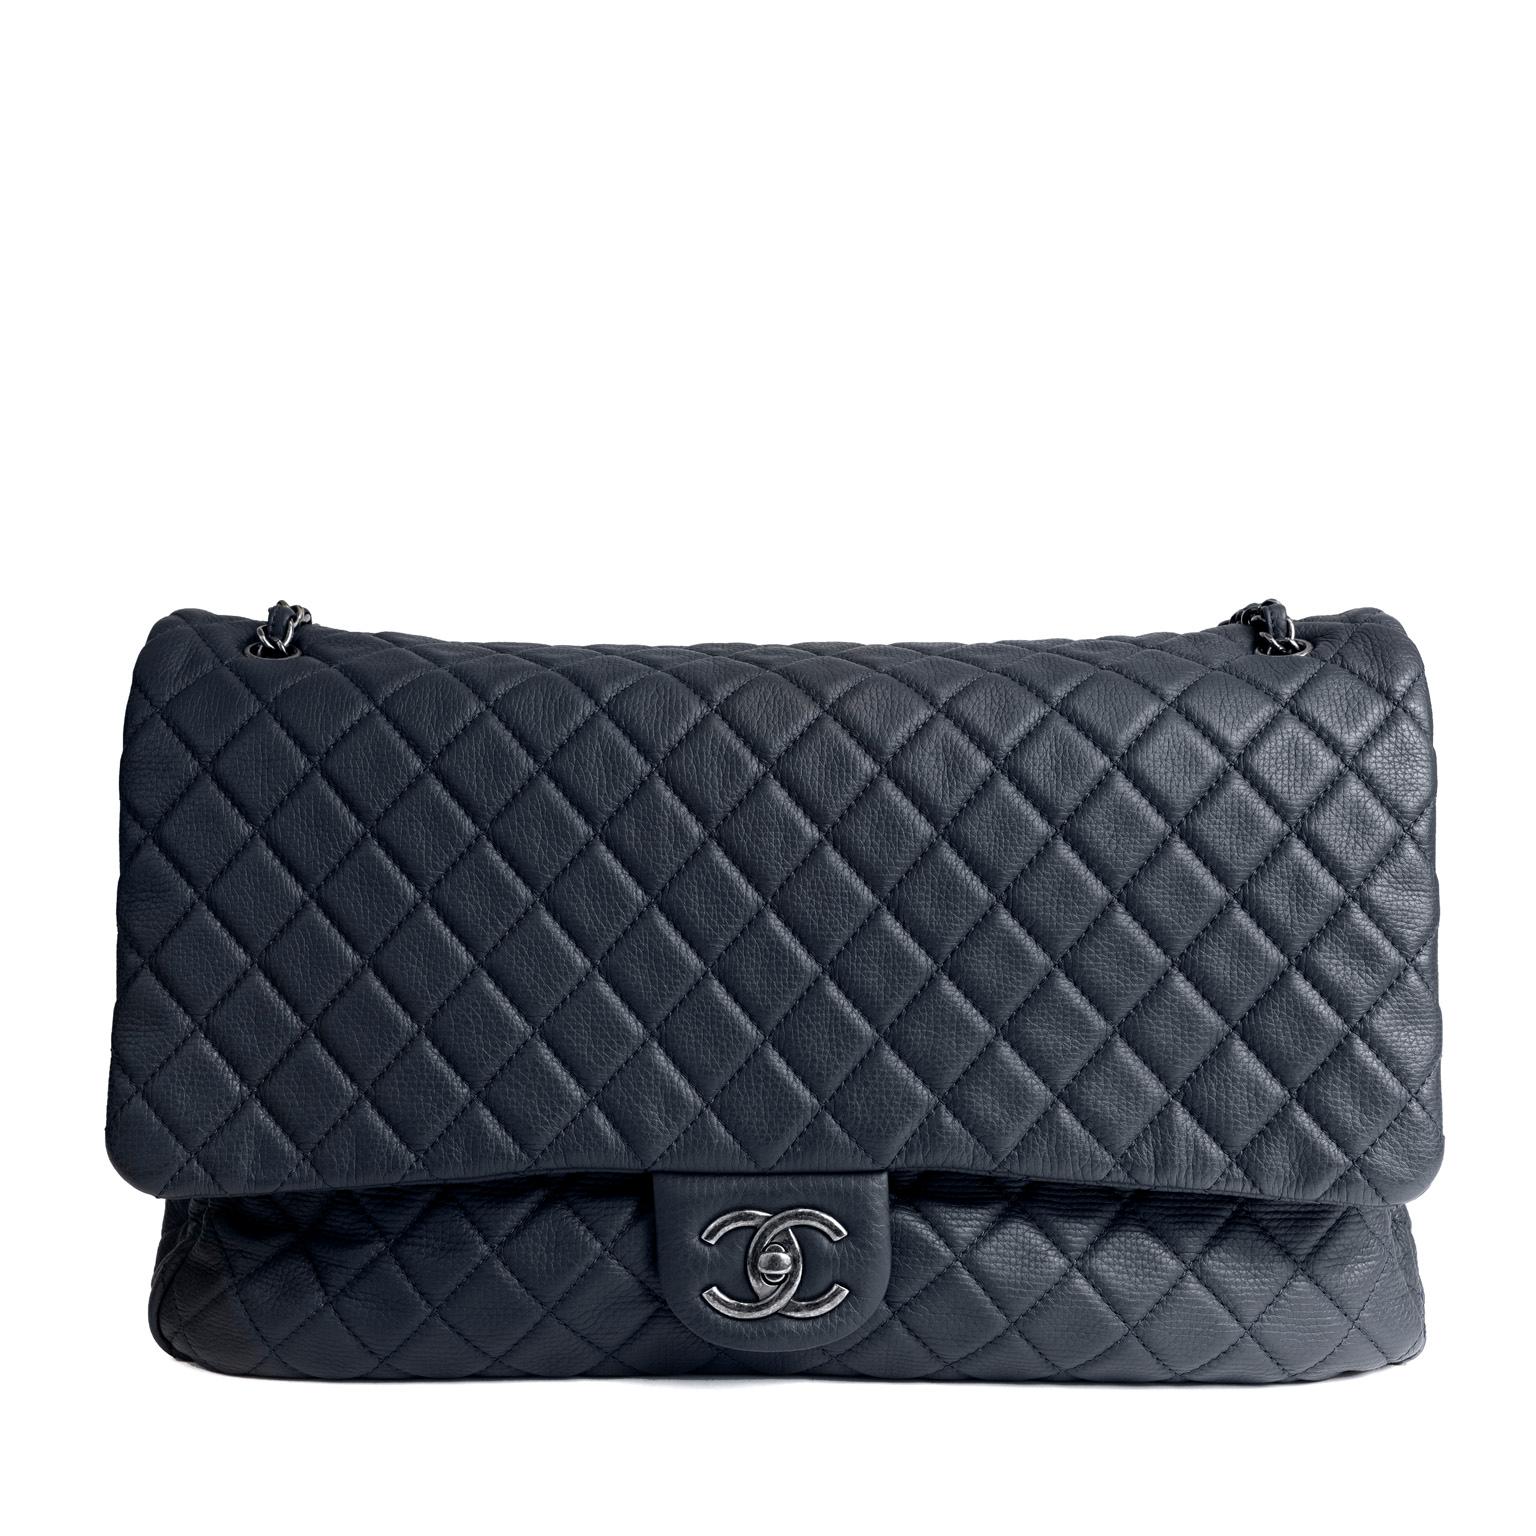 Xxl Chanel Travel - 5 For Sale on 1stDibs